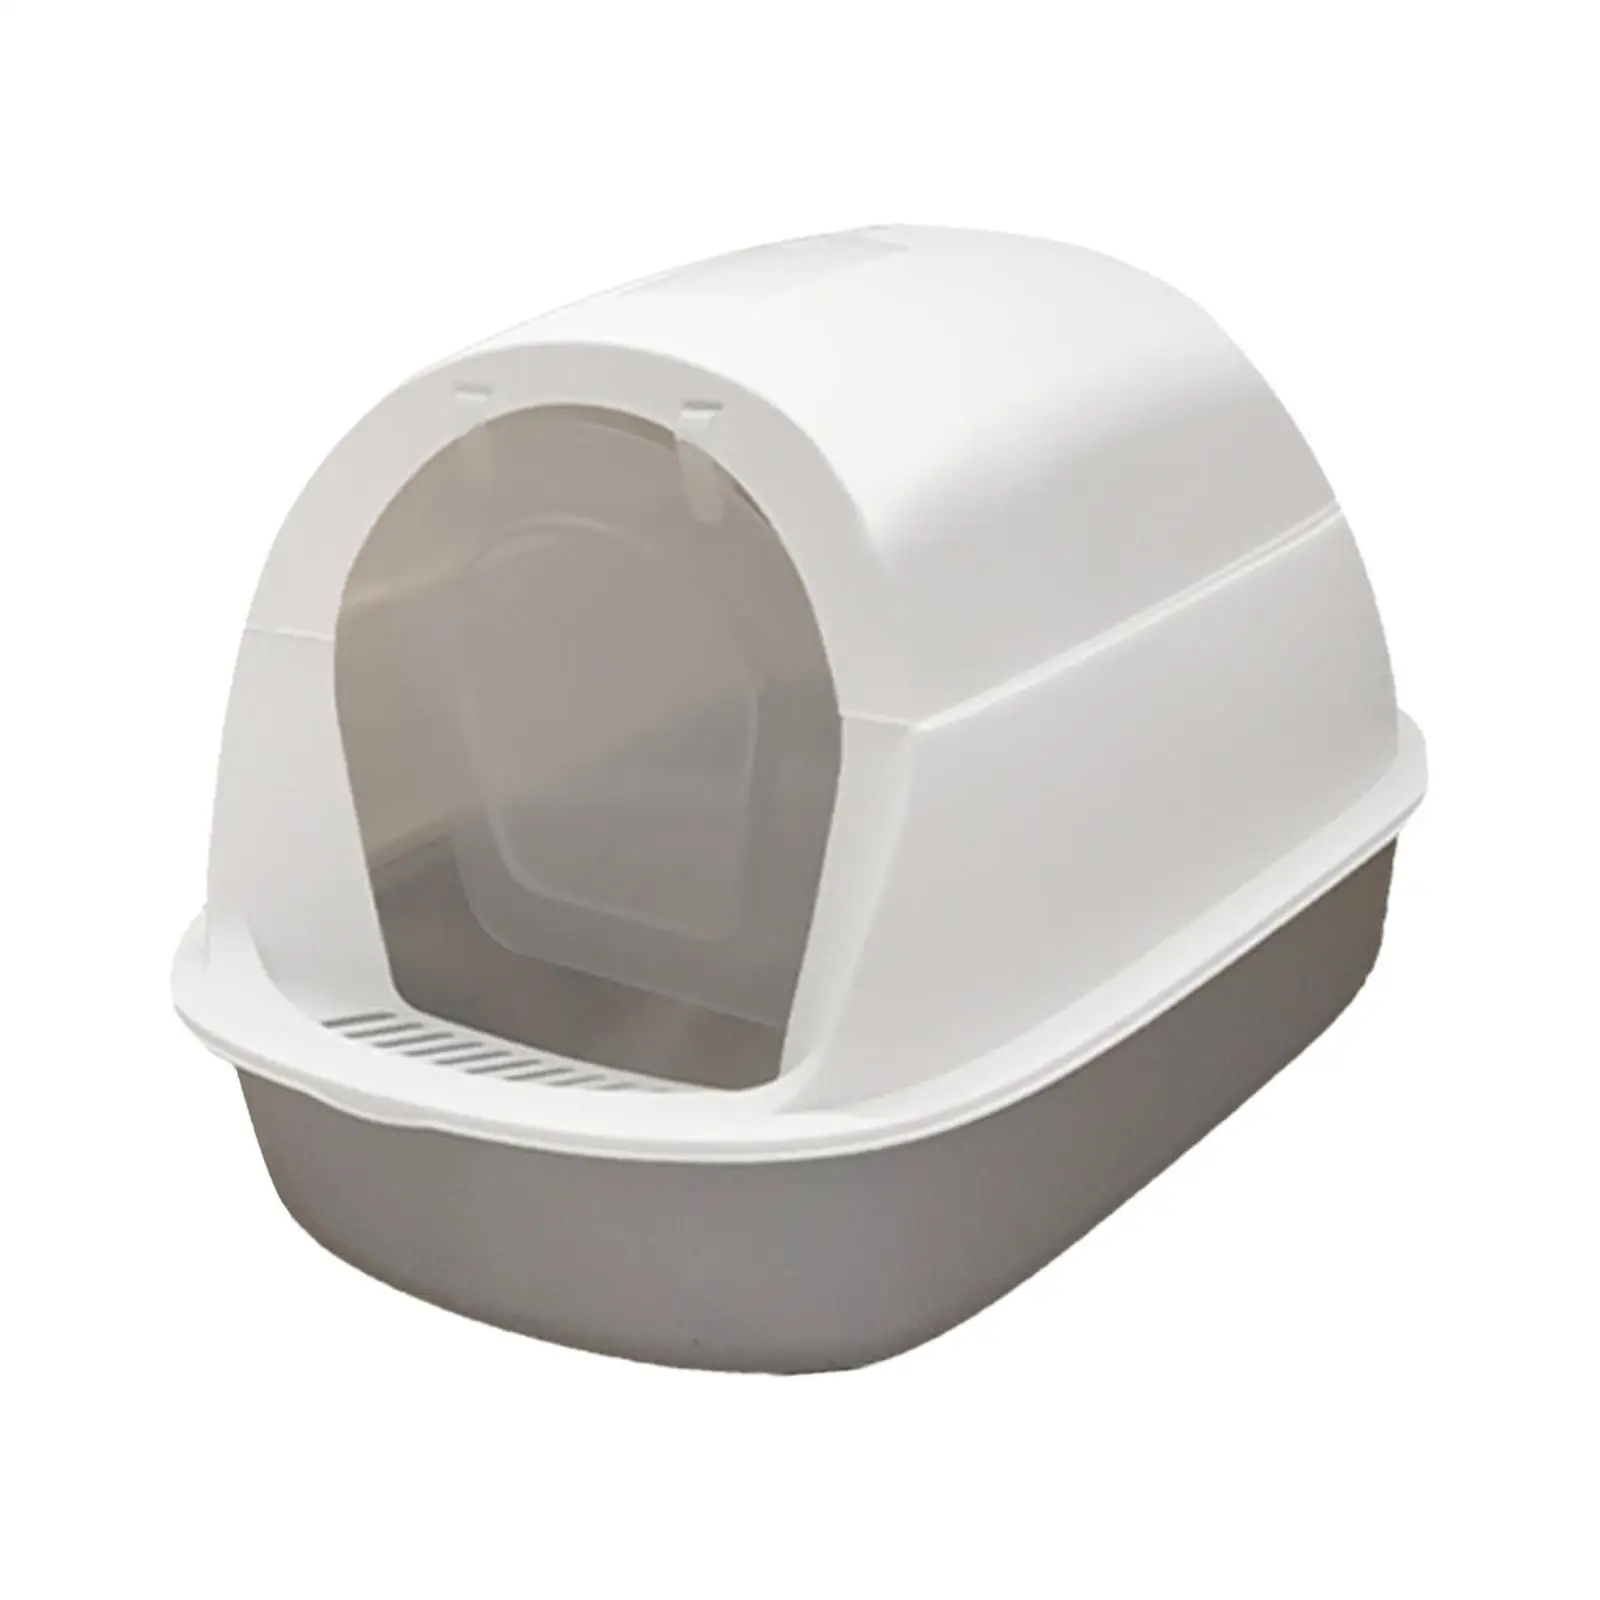 Hooded Cat Litter Box Pet Supplies Cat Sand Box for Small Pets Indoor Cats